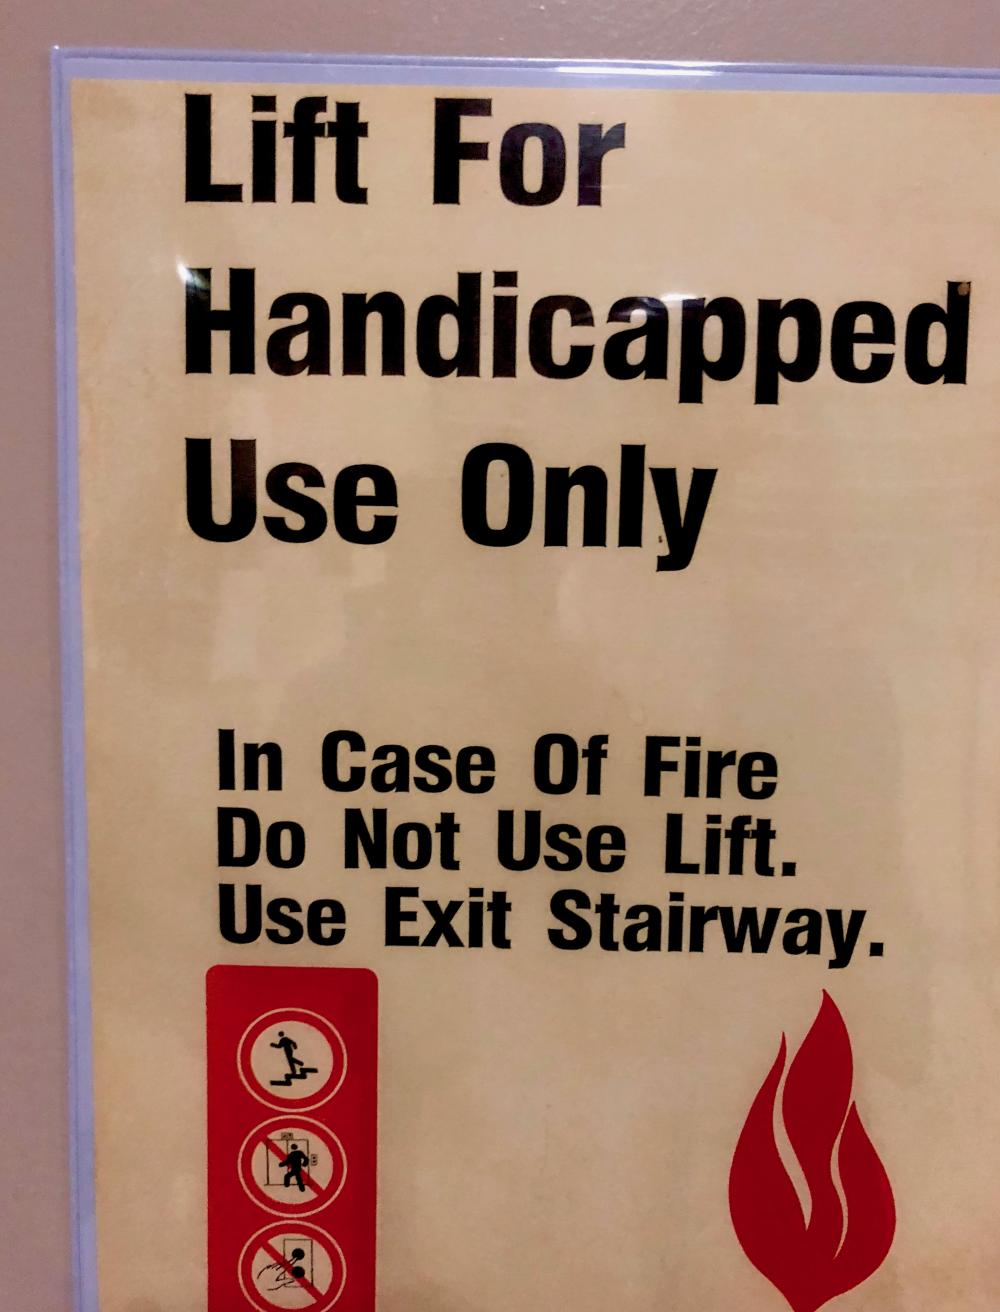 Lift for hanicapped use only